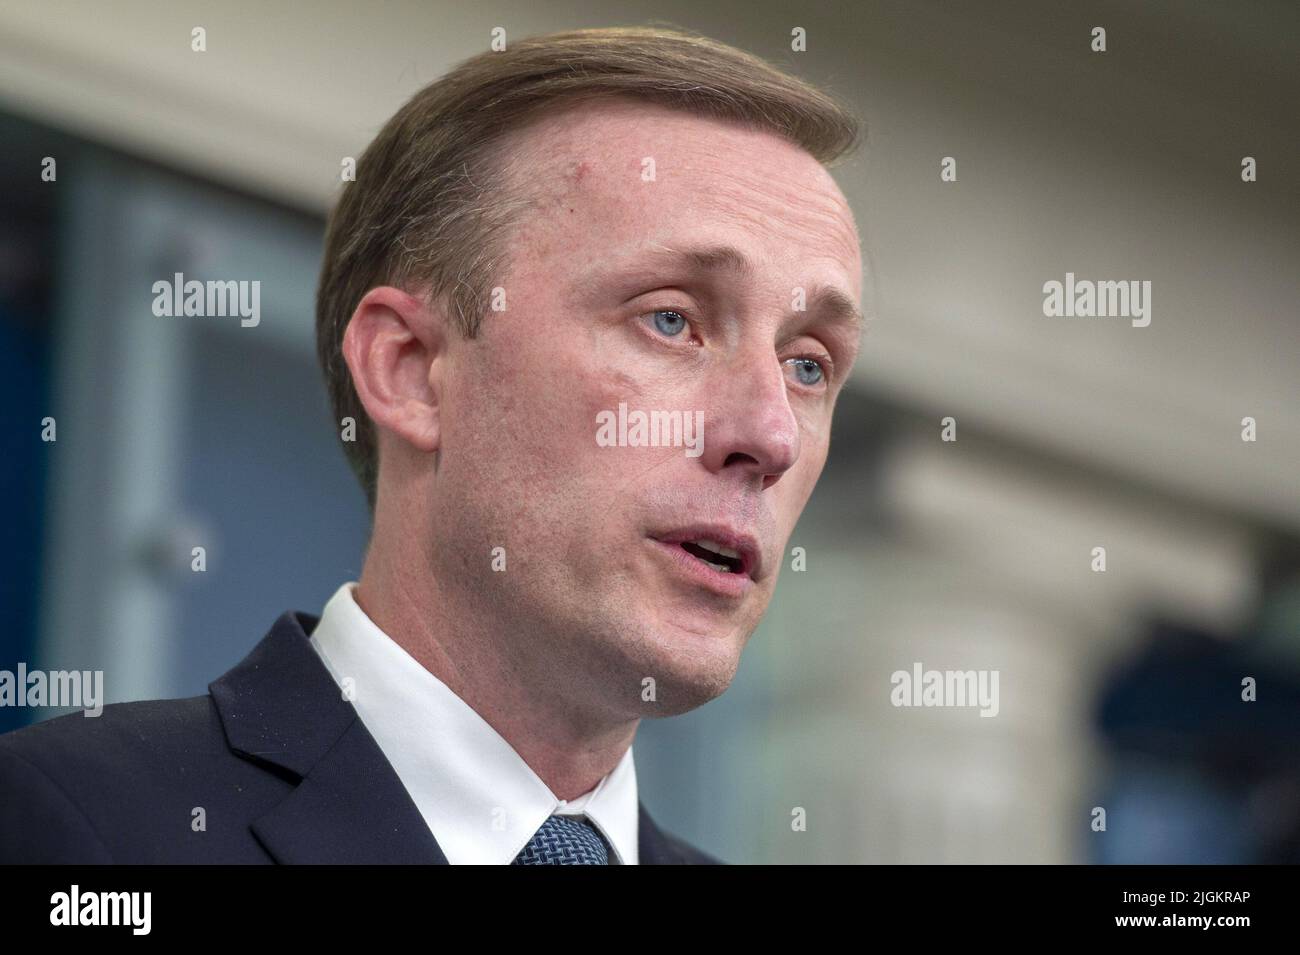 Washington, United States. 11th July, 2022. National Security Advisor of the United States Jake Sullivan speaks during the daily press briefing in the James Brady Briefing Room at the White House in Washington, DC on Monday, July 11, 2022. Photo by Bonnie Cash/UPI Credit: UPI/Alamy Live News Stock Photo